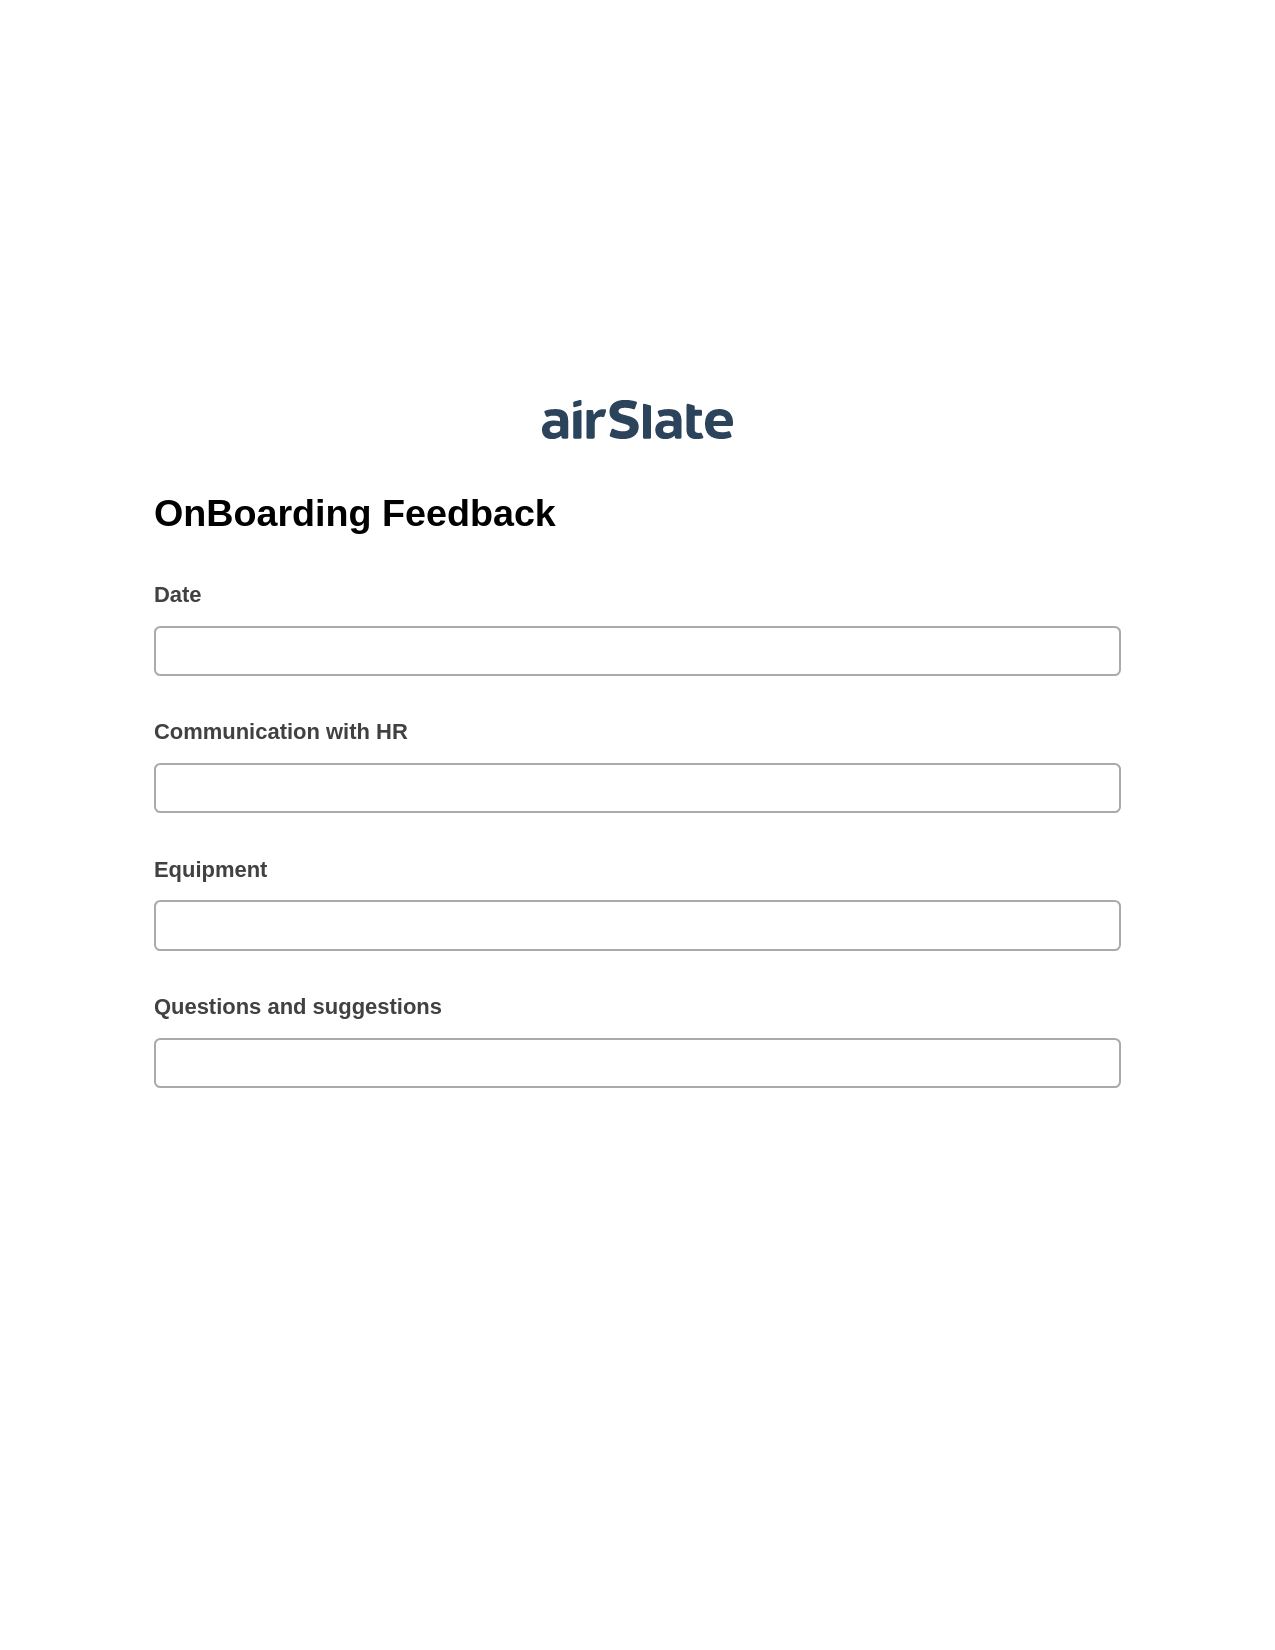 Multirole OnBoarding Feedback Pre-fill Slate from MS Dynamics 365 Records Bot, Email Notification Bot, Box Bot